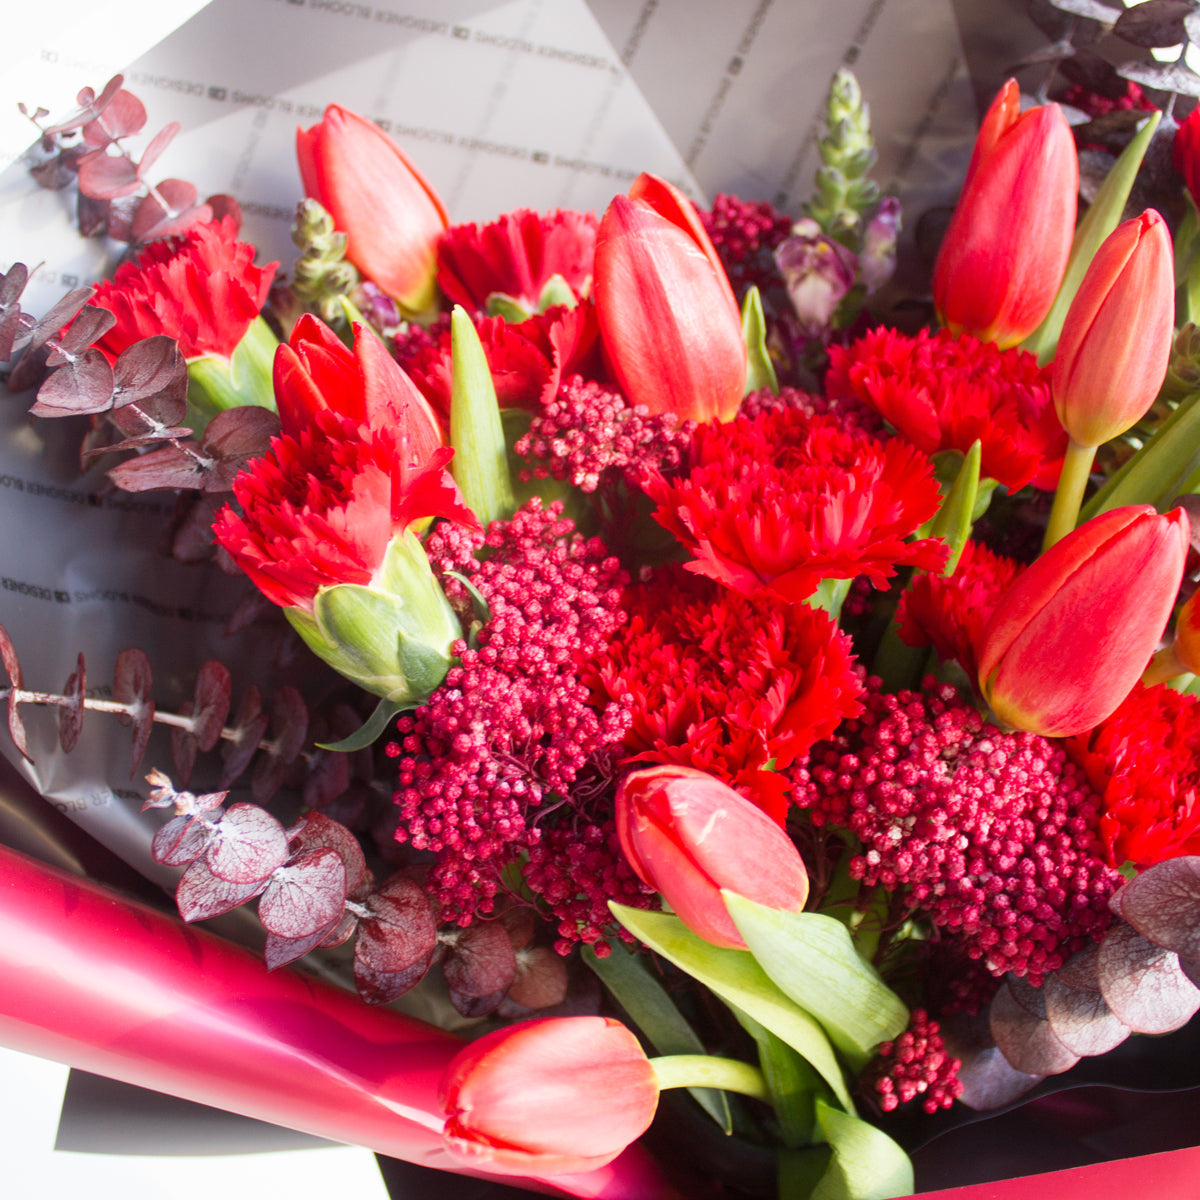 Tulips and Carnations - Red Bouquet